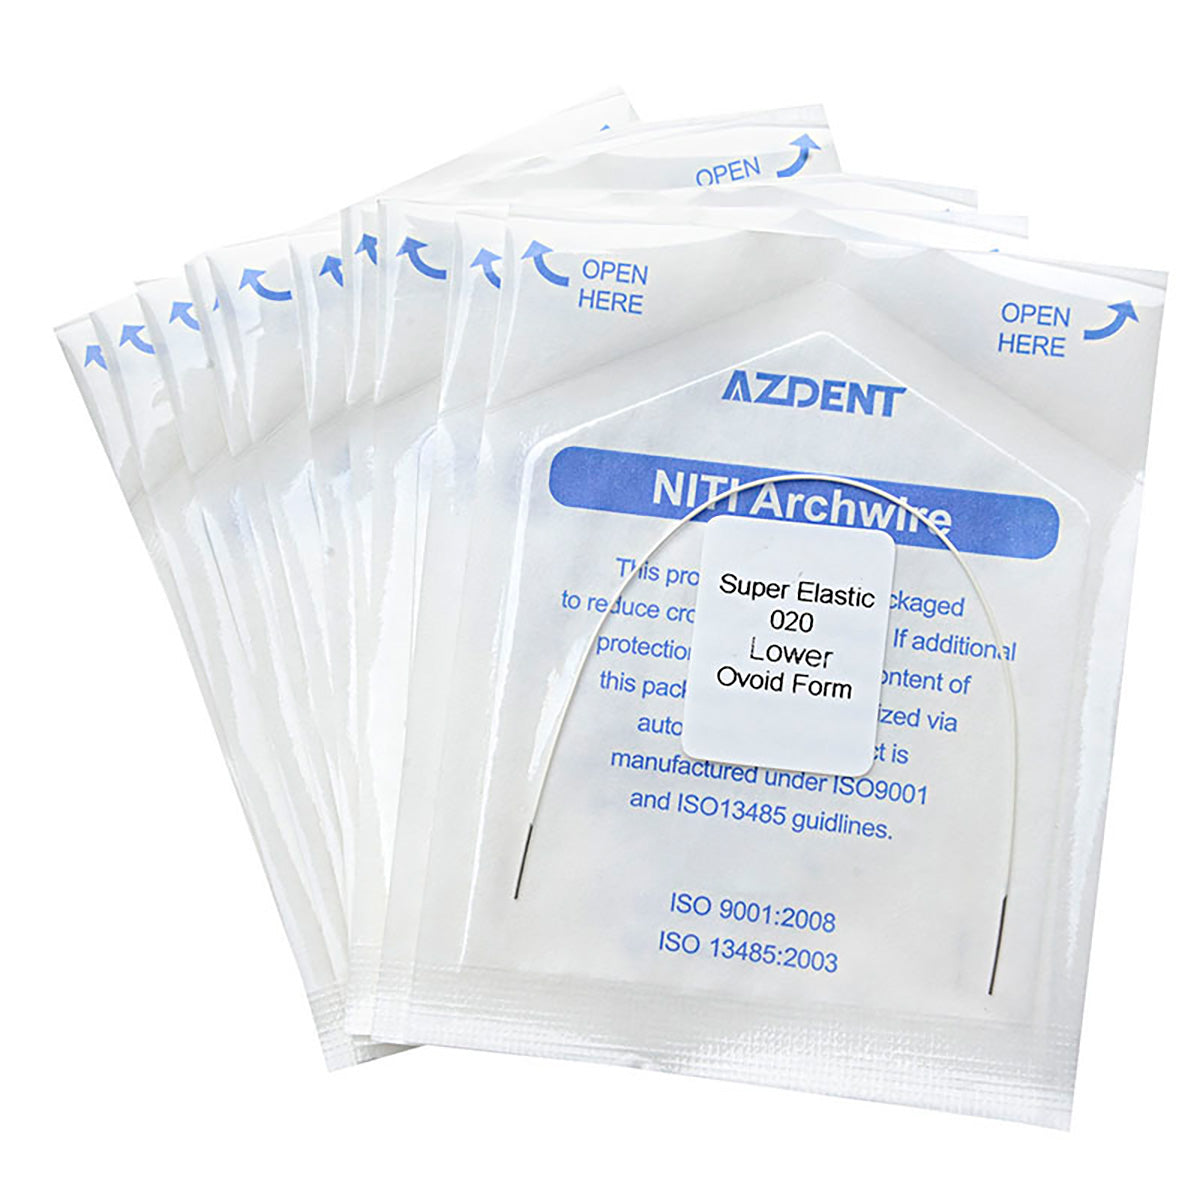 10 Packs AZDENT Archwire NiTi Super Elastic Colored Coated Ovoid Round 0.020 Lower 1pcs/Pack - azdentall.com